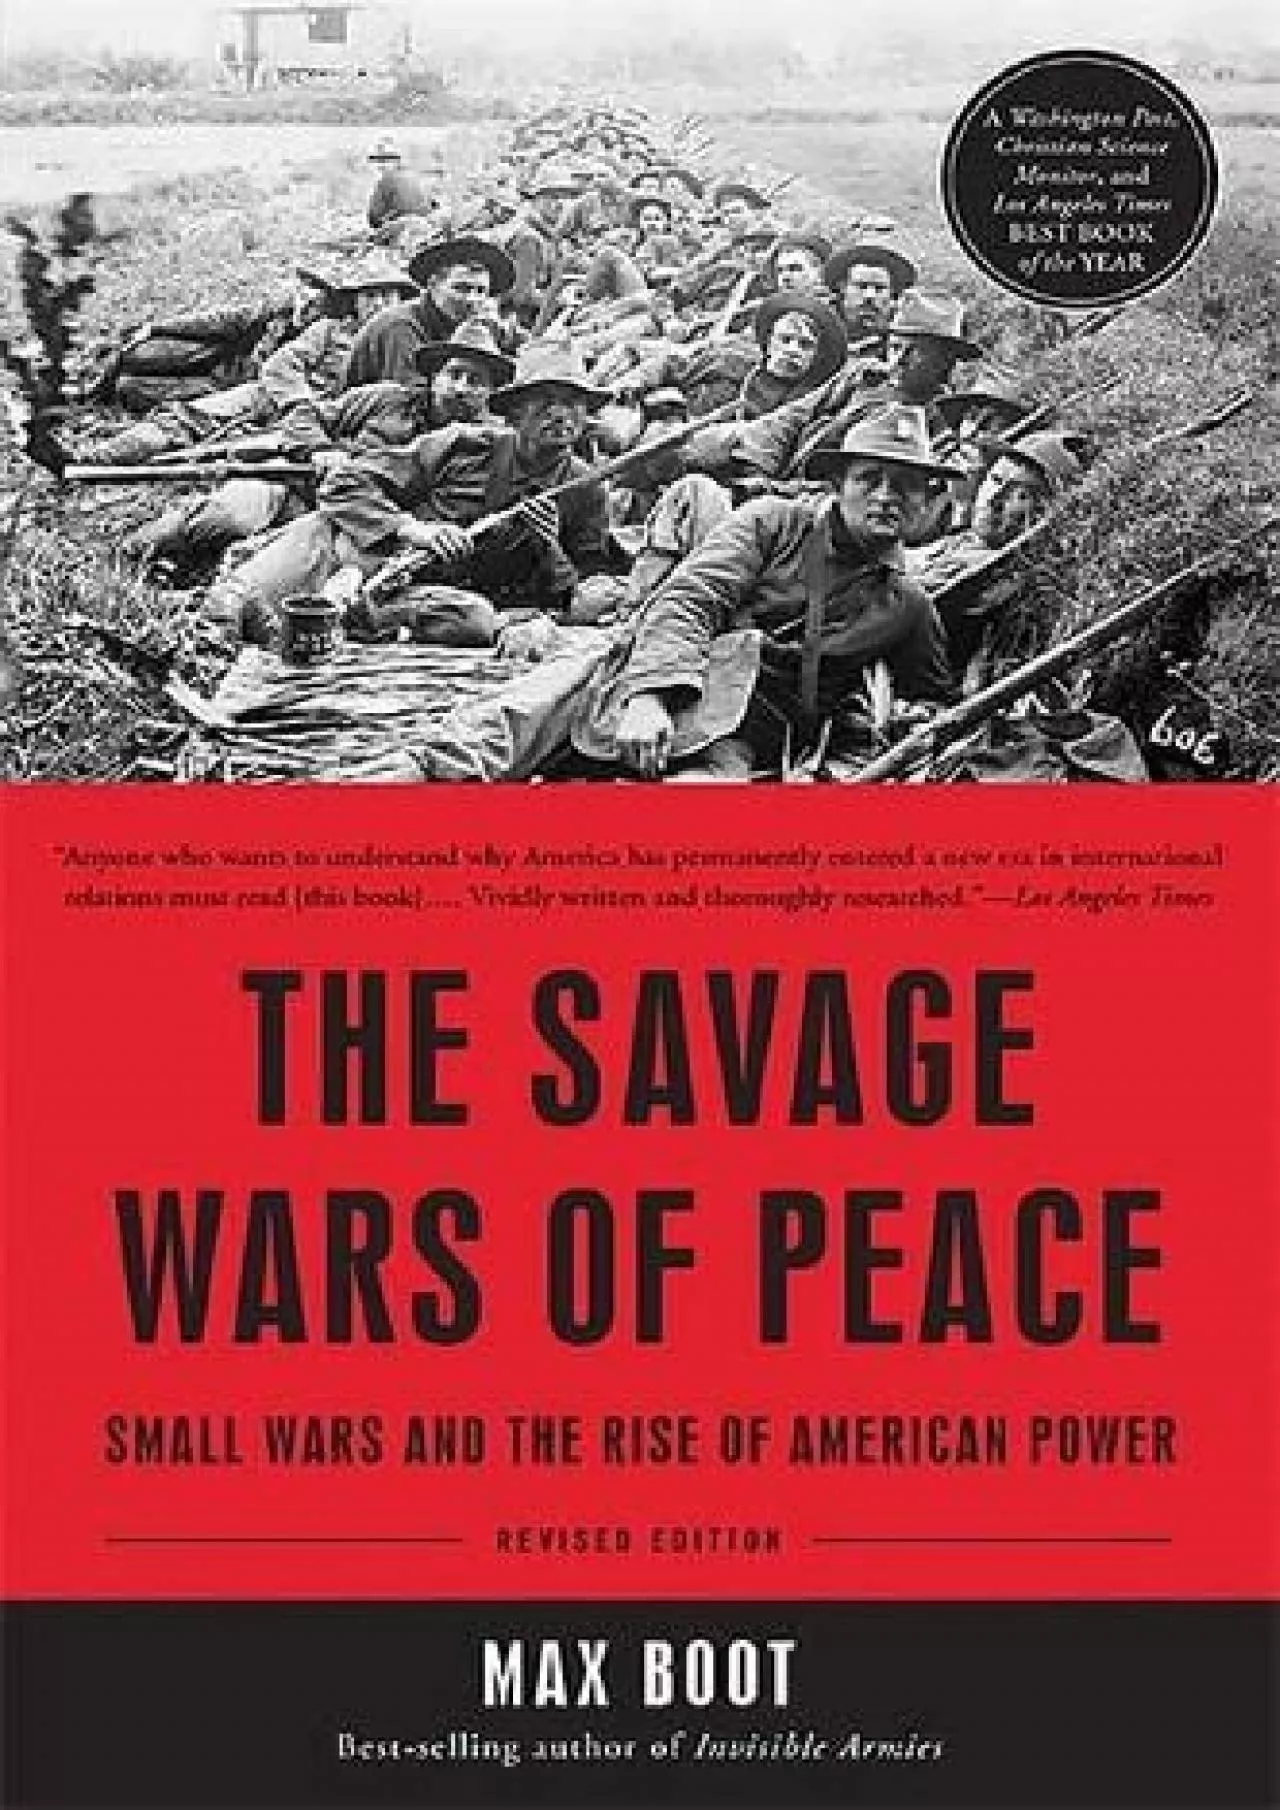 (BOOK)-The Savage Wars of Peace: Small Wars and the Rise of American Power